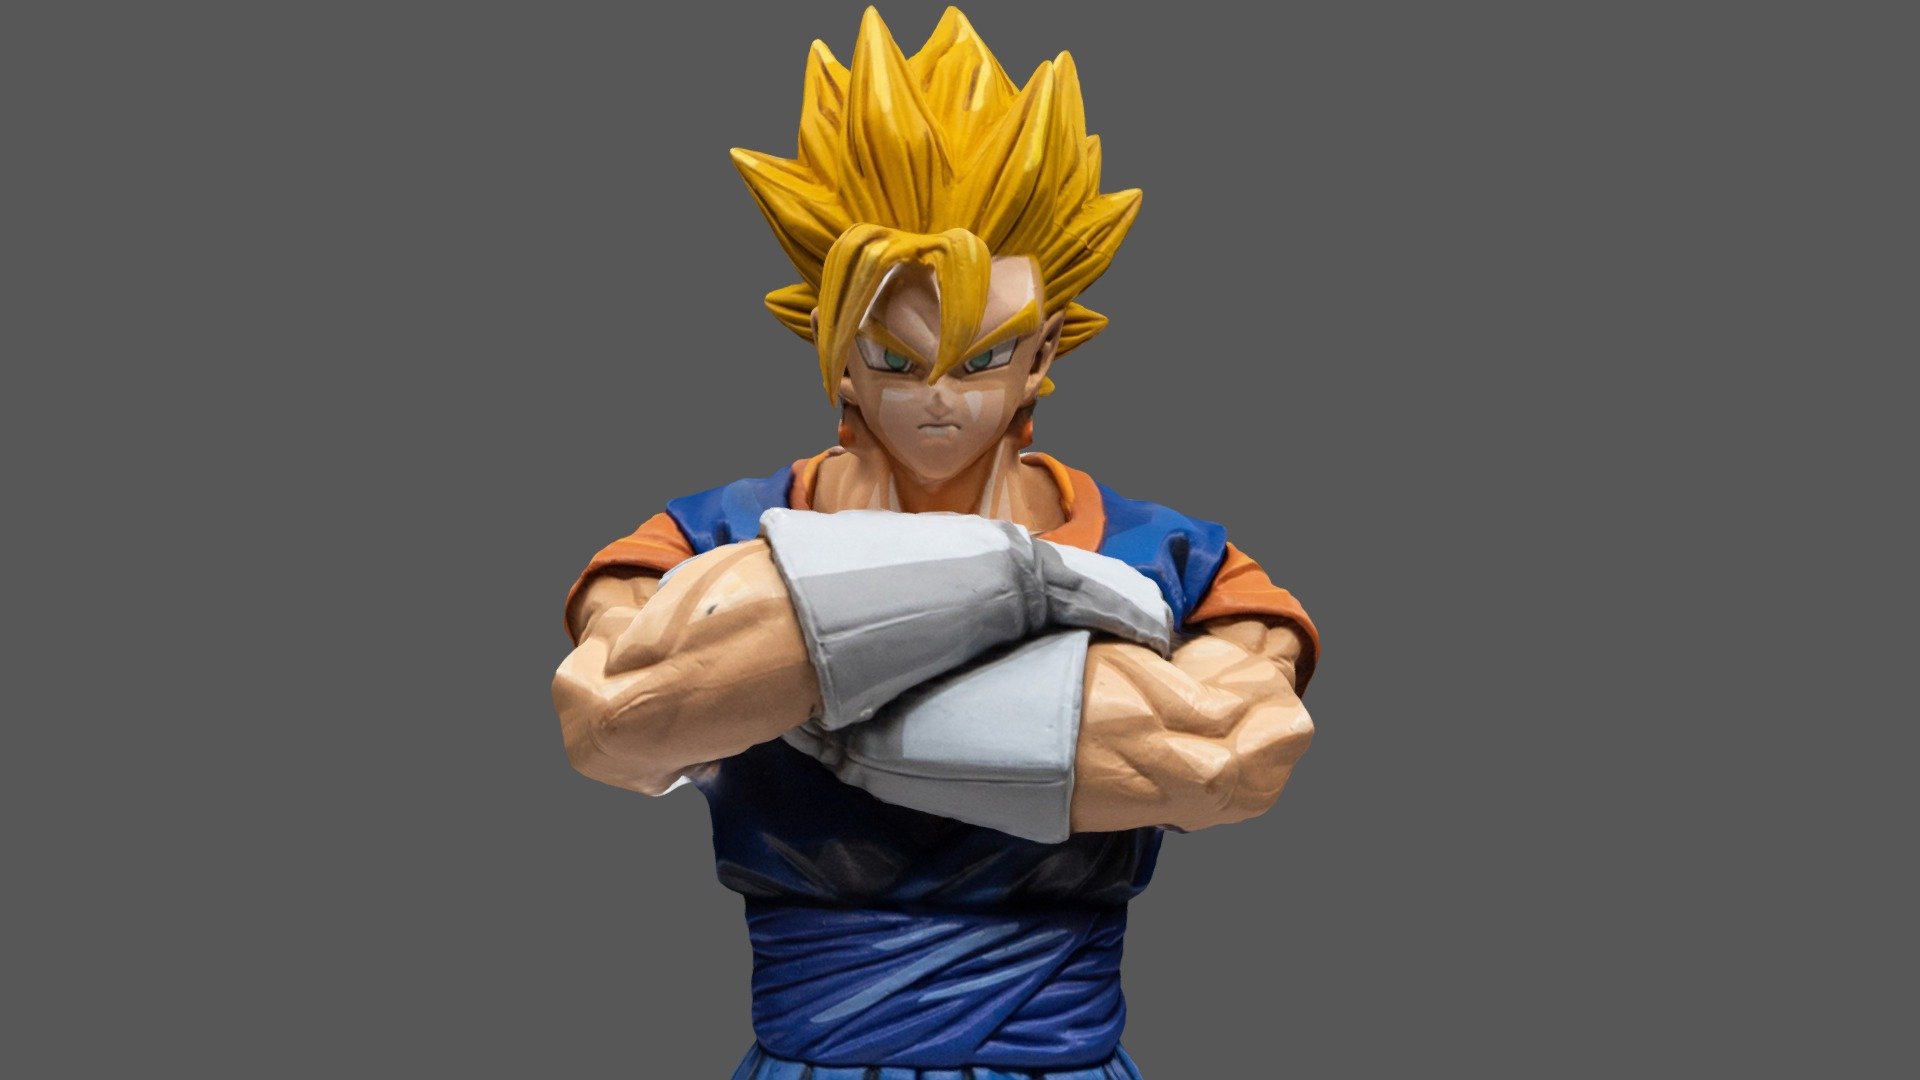 Please leave a like before downloading to post more free content 
Free action figure model 3d model